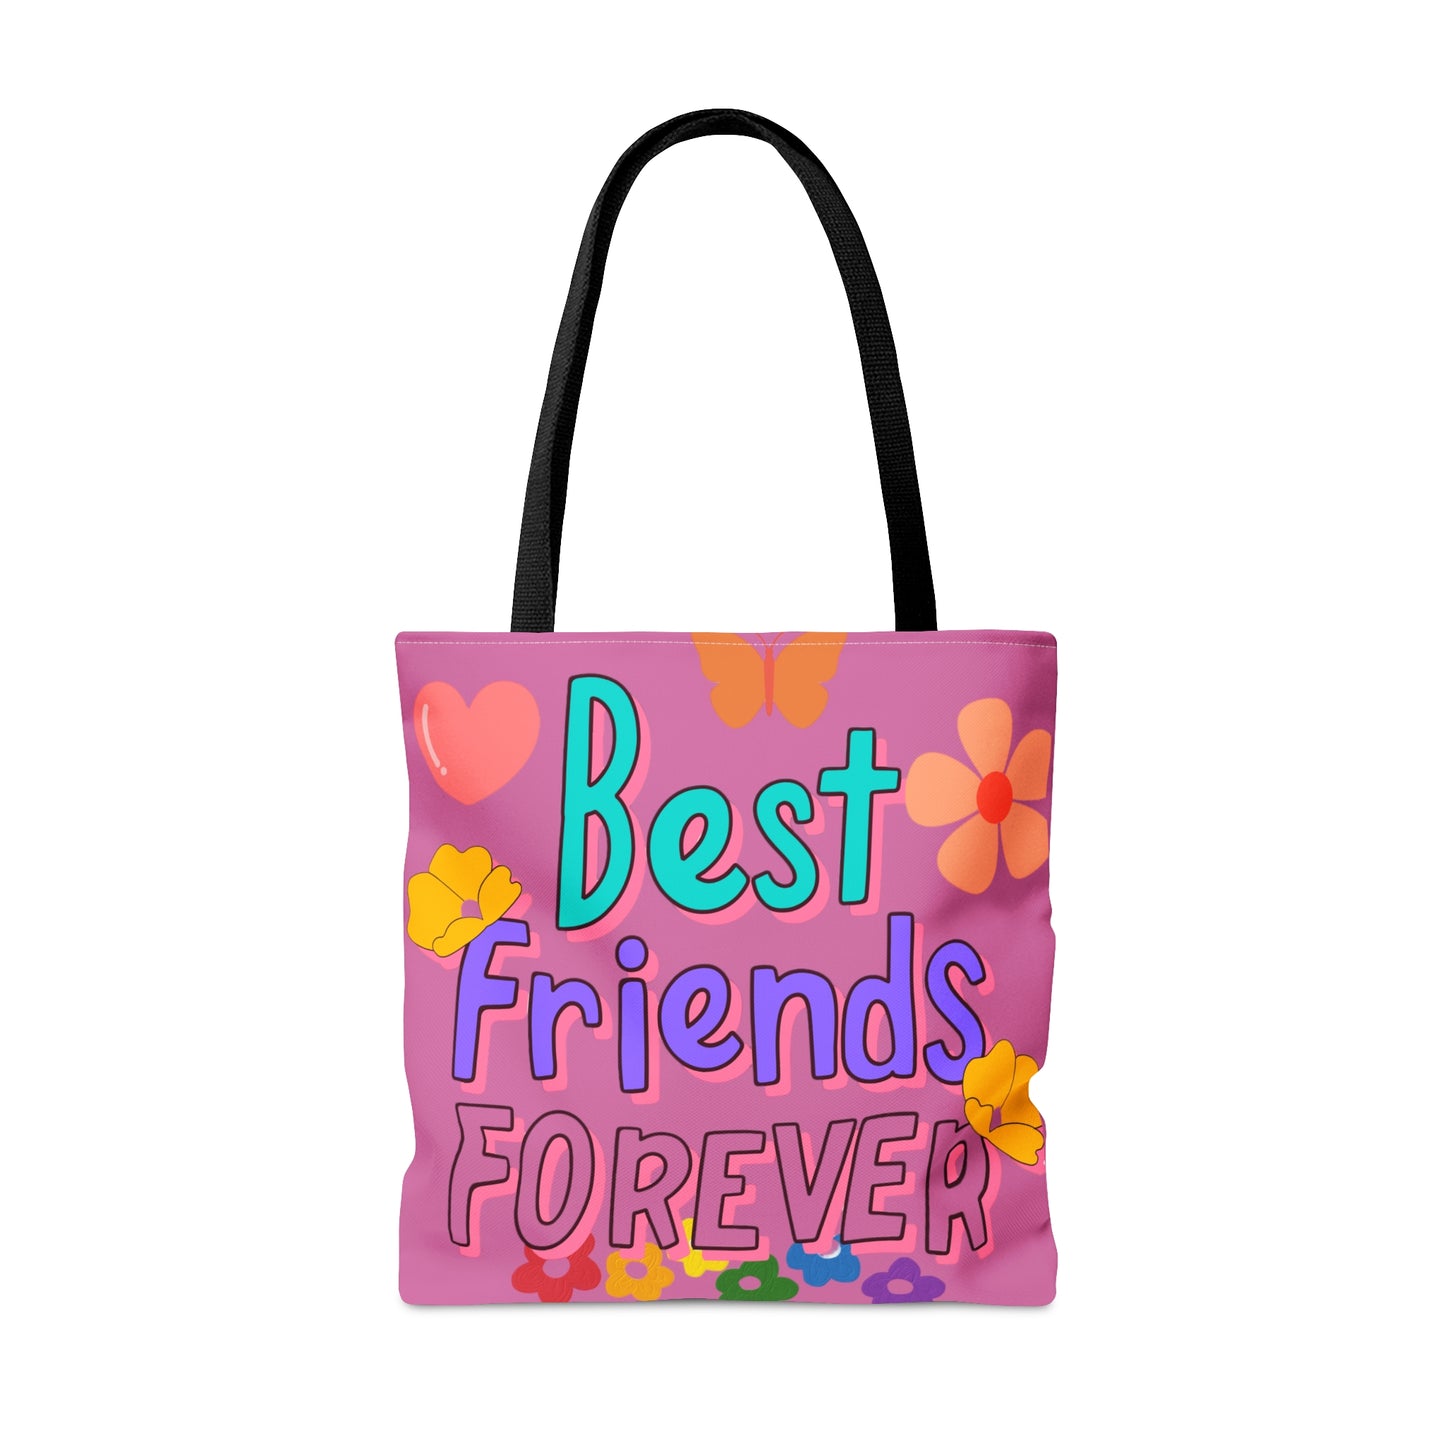 Vibrant and colorful "Best friends FOREVER" Tote Bag in 3 sizes to meet your needs.